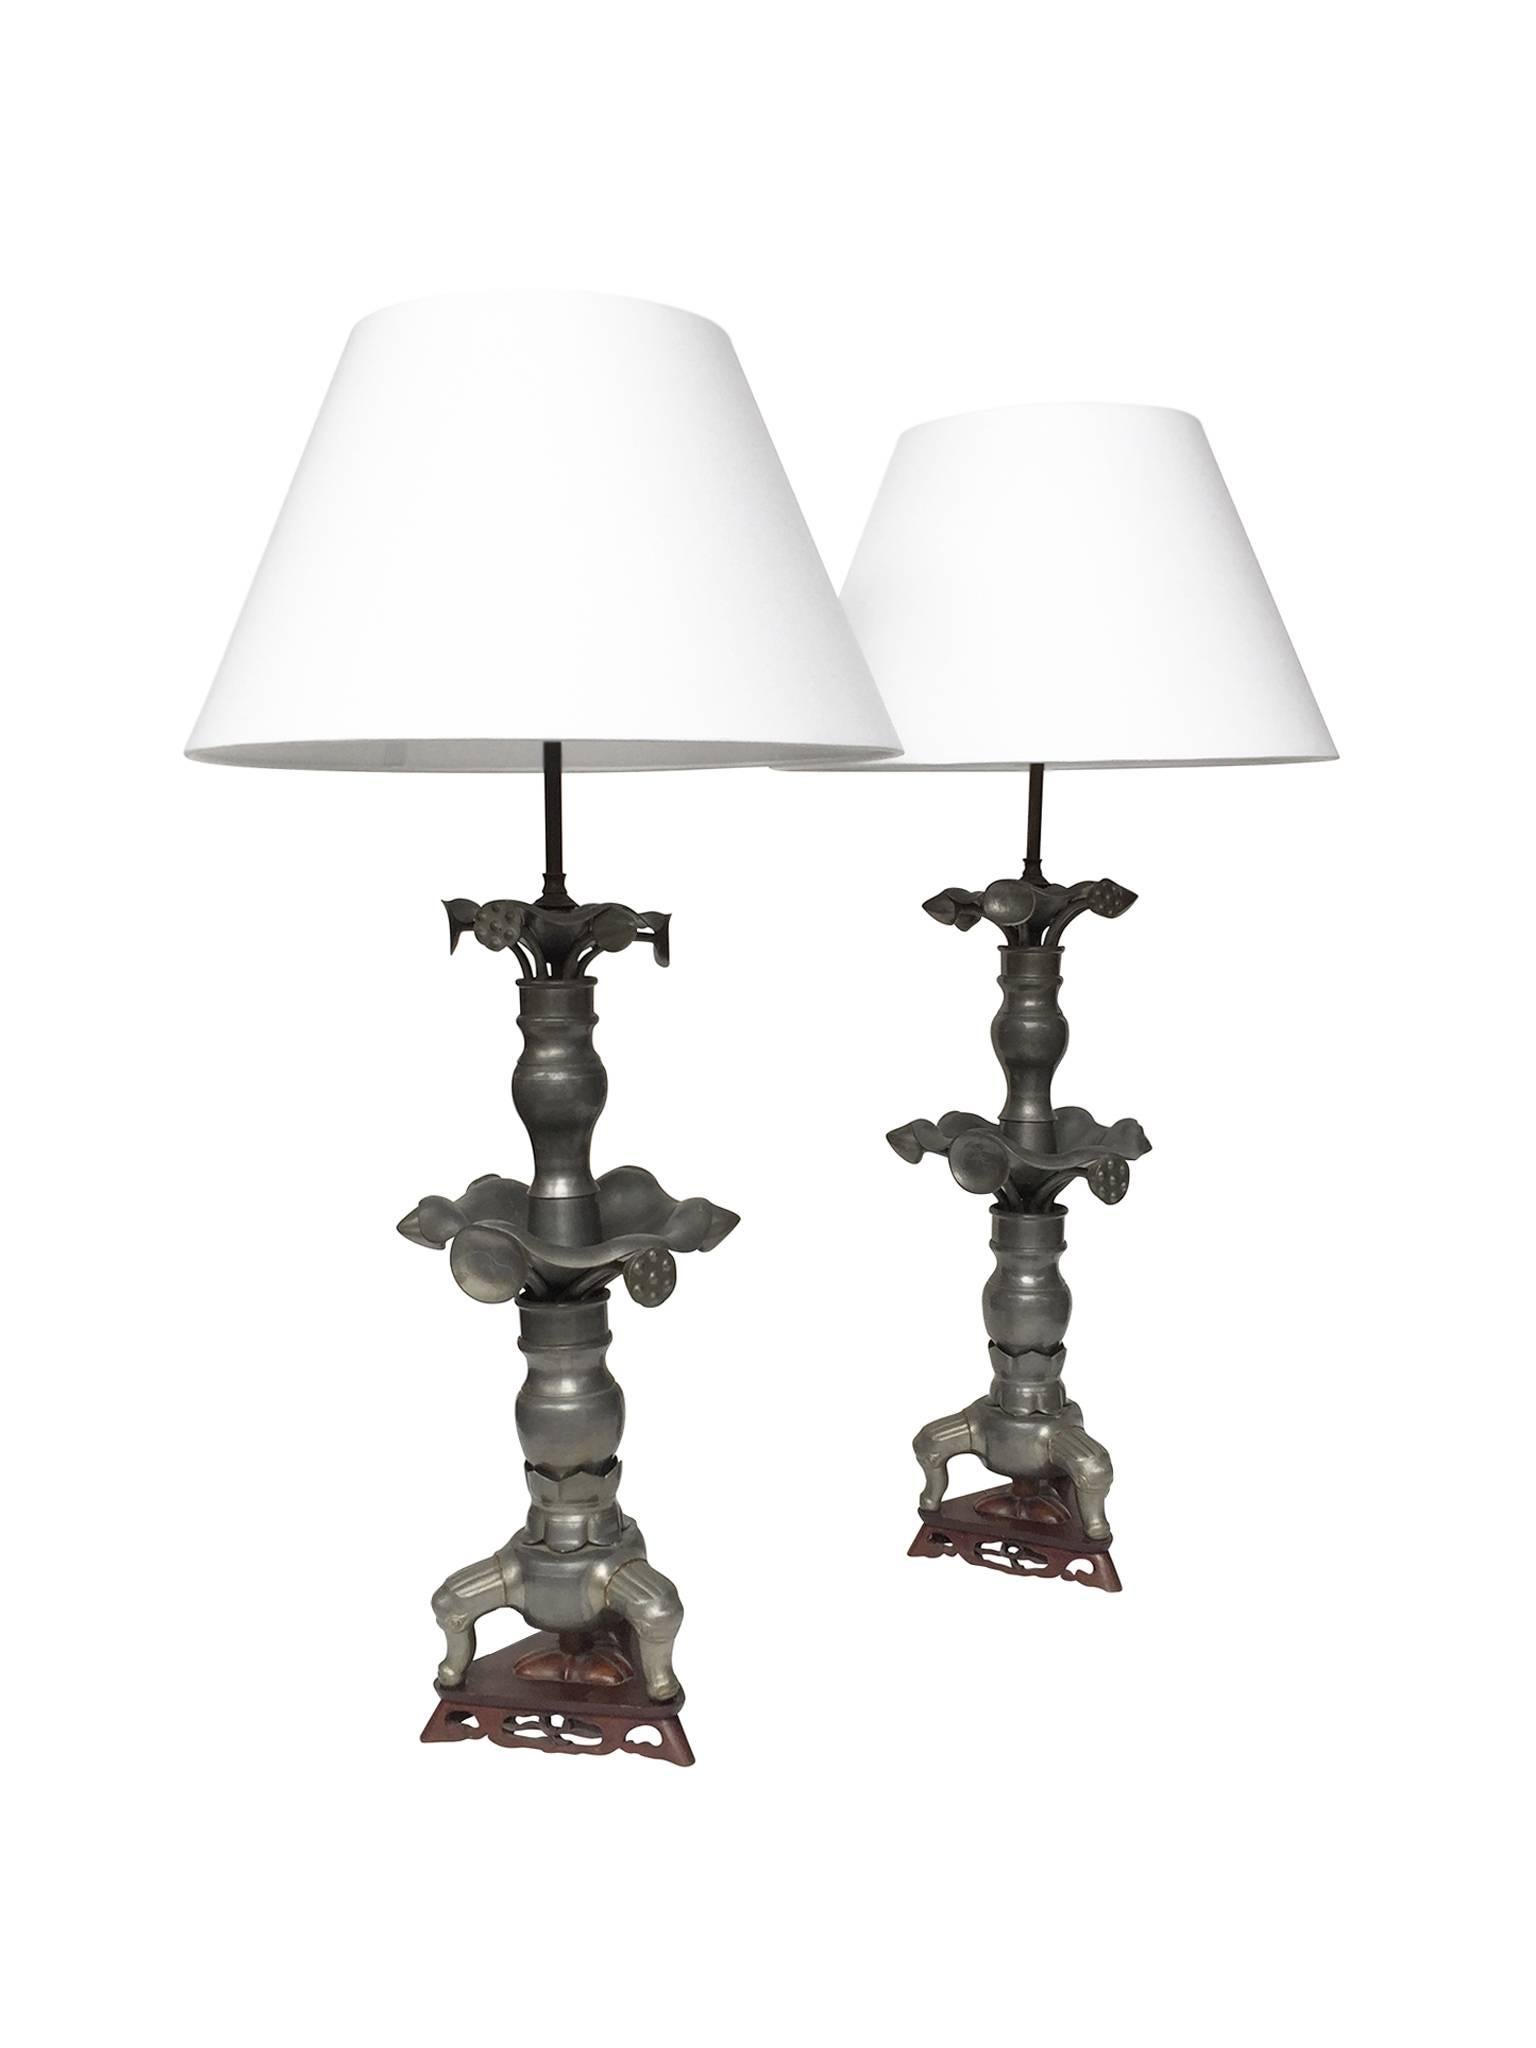 These lamps are comprised of 19th century pewter candlesticks that have been transformed into stunning table lamps. Their bases are carved wood with a warm red finish. The pewter bodies have undulating forms resembling petals and stems that radiate